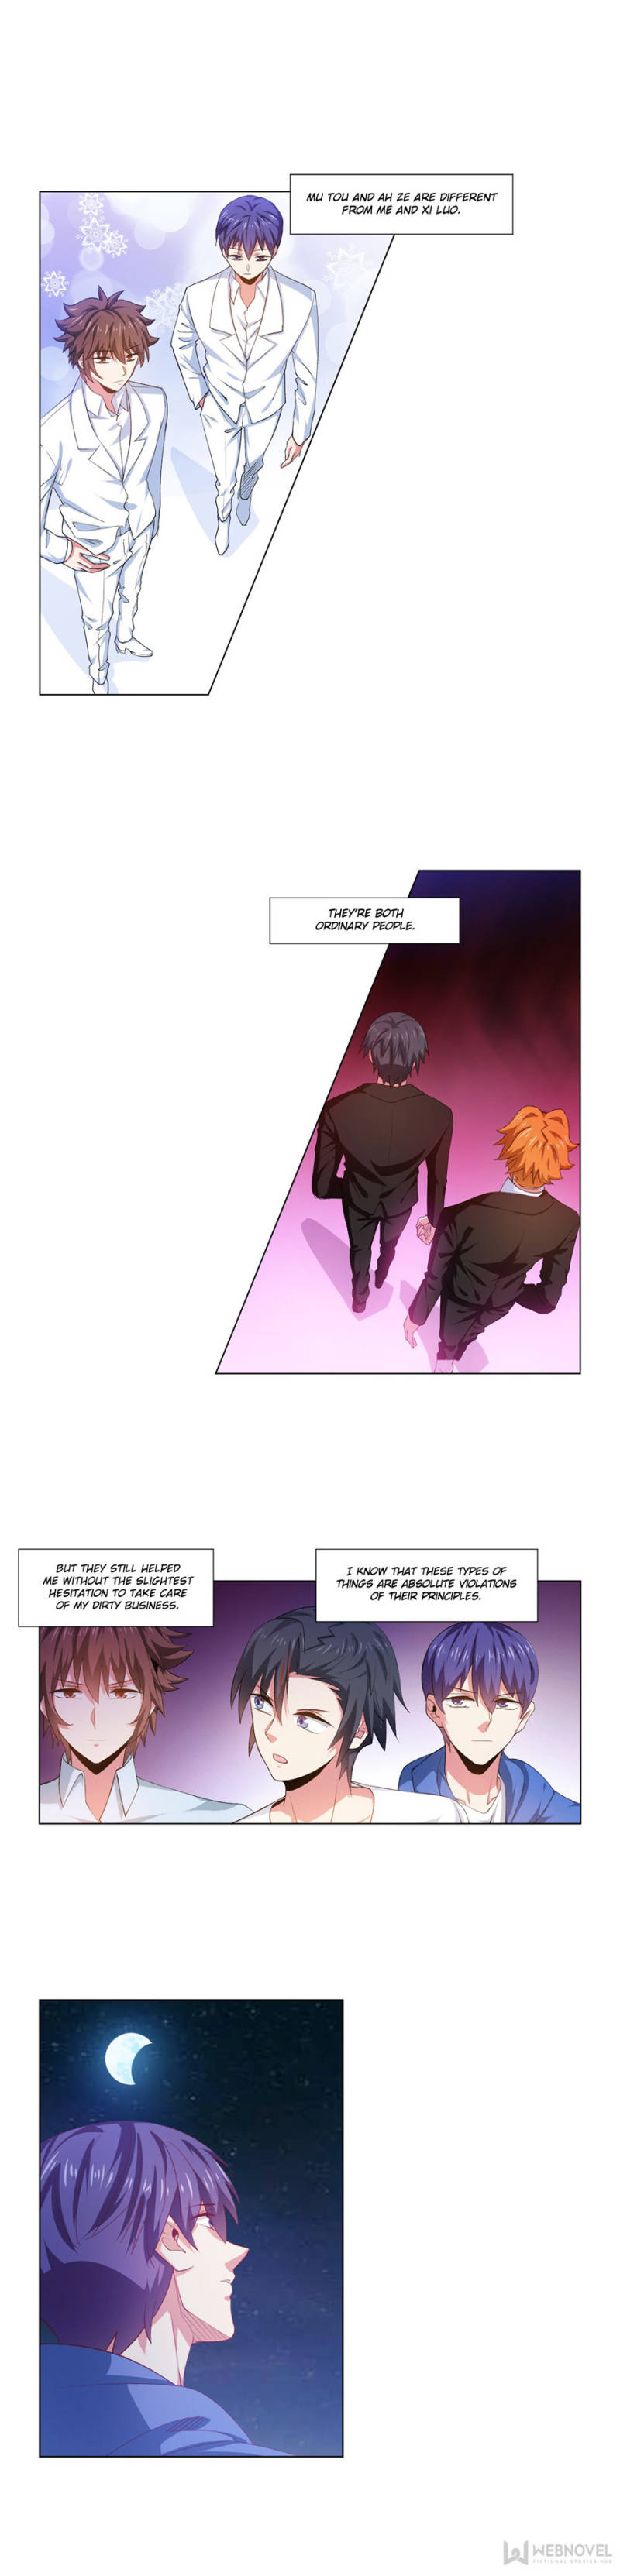 Vicious Luck - chapter 222 - #1